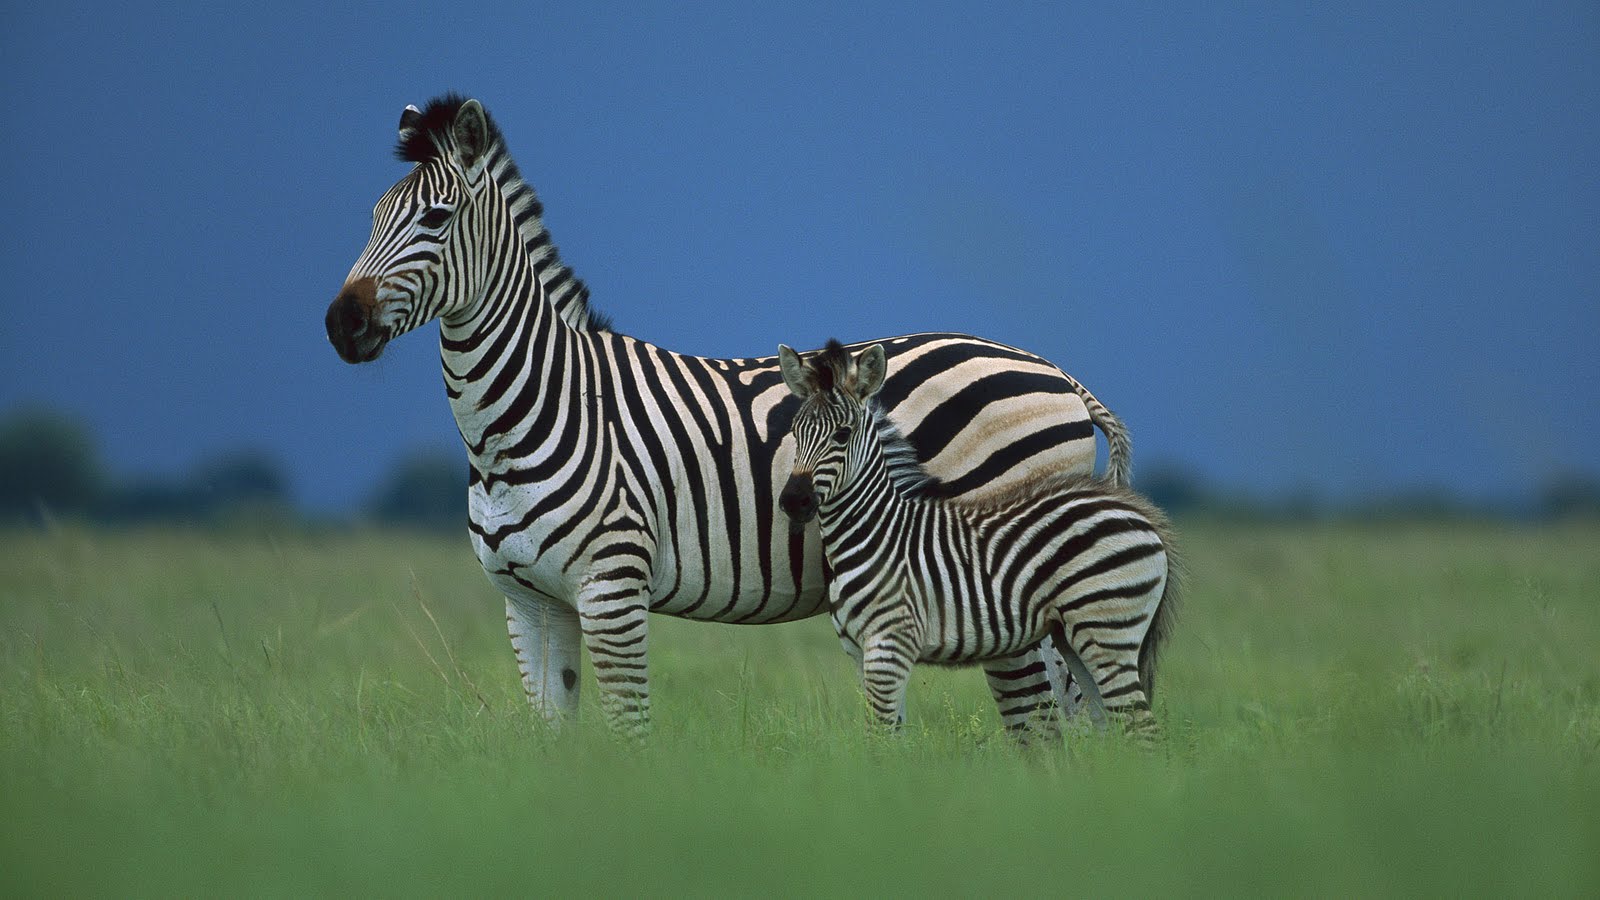 Funny Image Collection: Image for Zebra wallpaper!